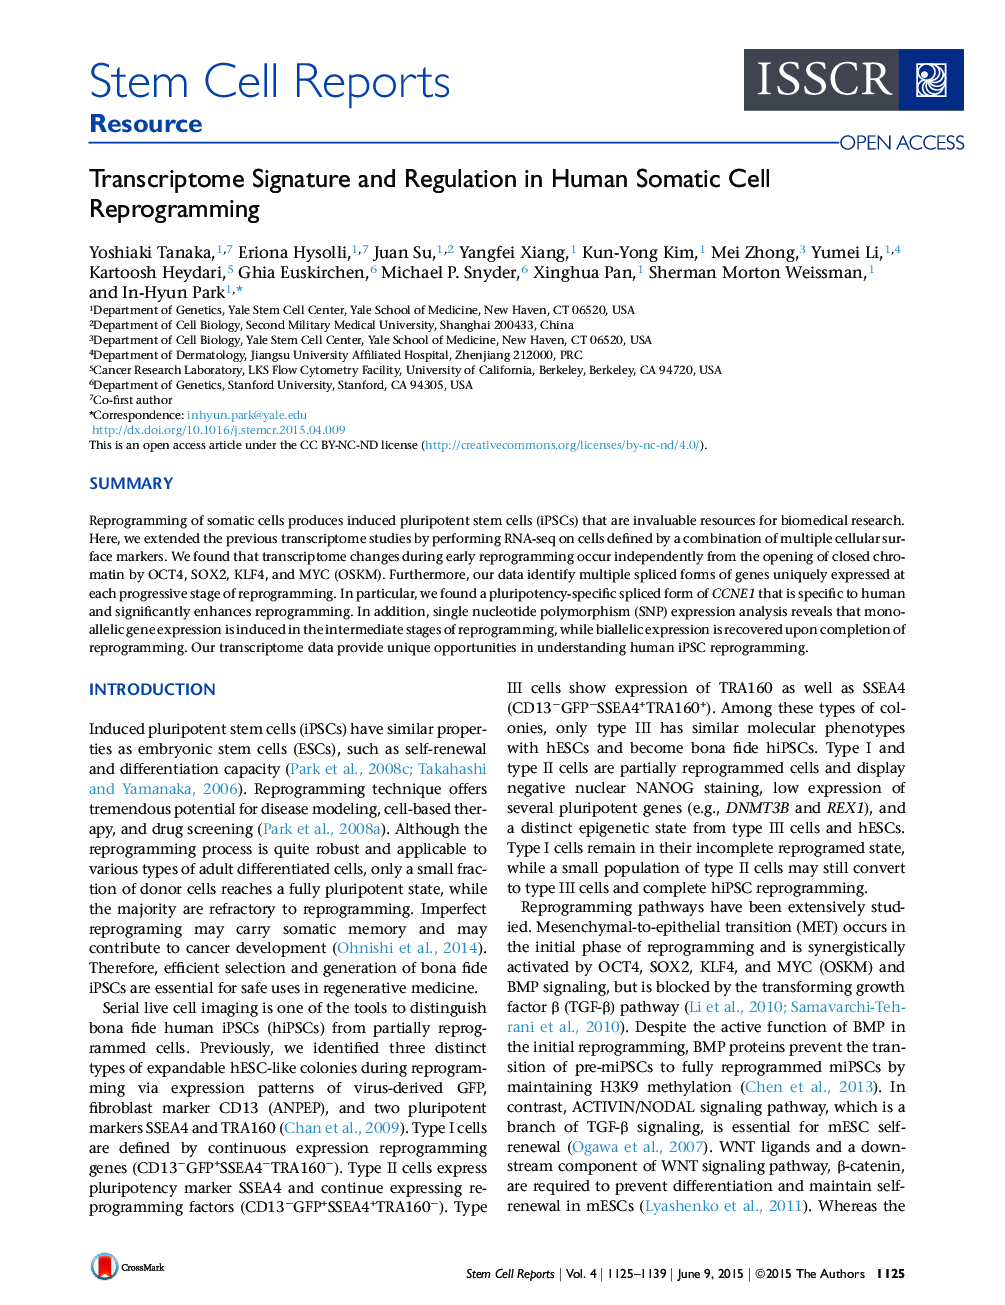 Transcriptome Signature and Regulation in Human Somatic Cell Reprogramming 